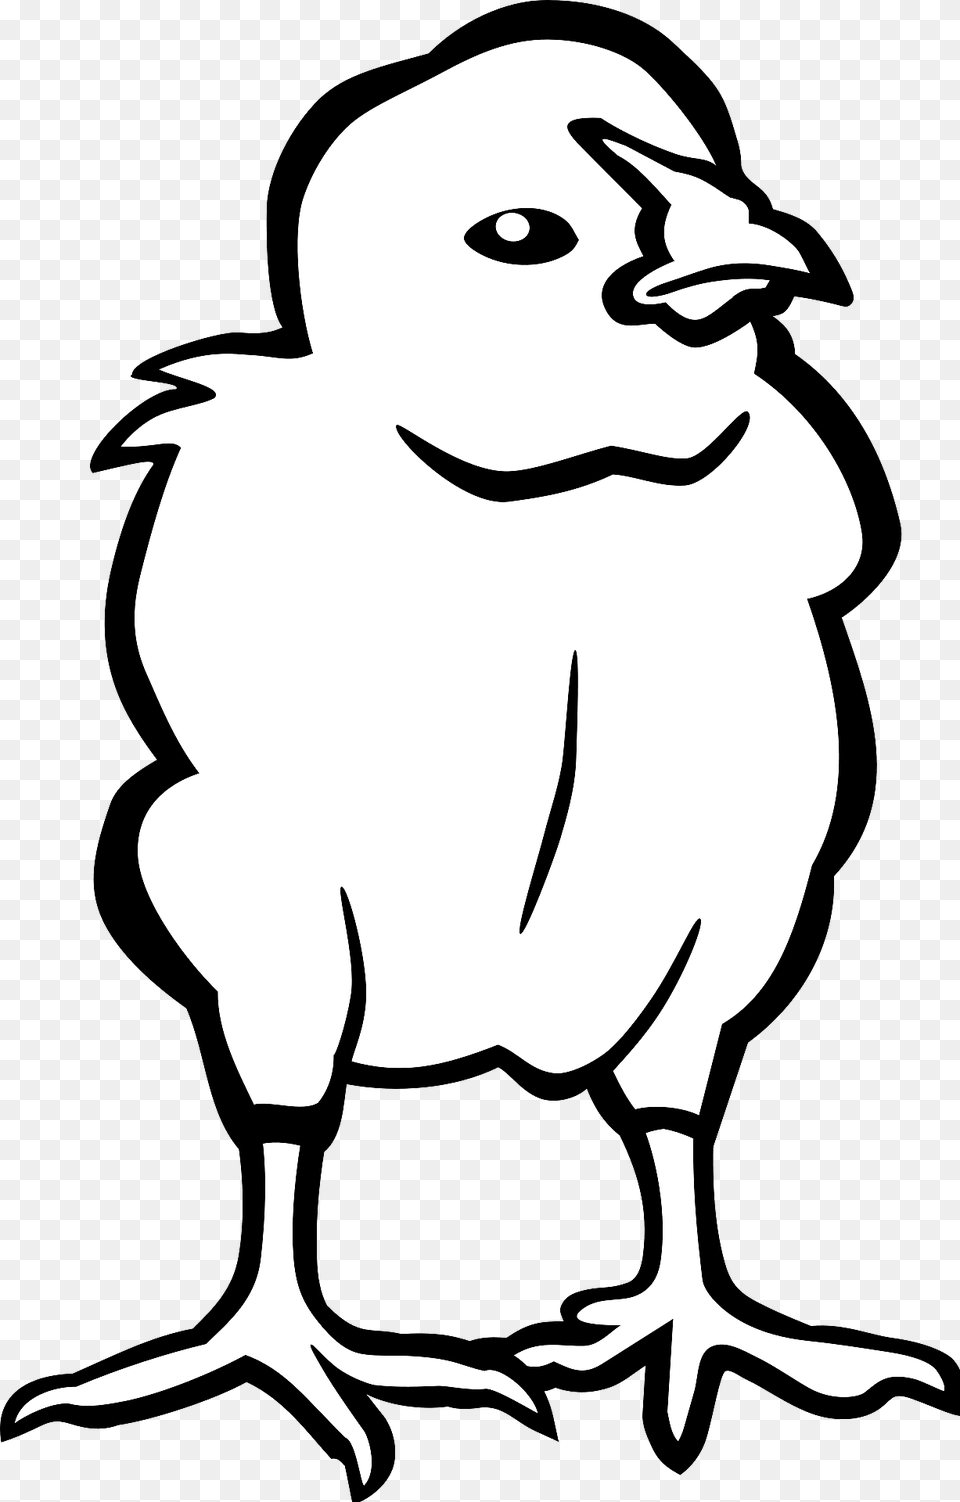 Chick Outline Clipart, Stencil, Animal, Bird, Poultry Png